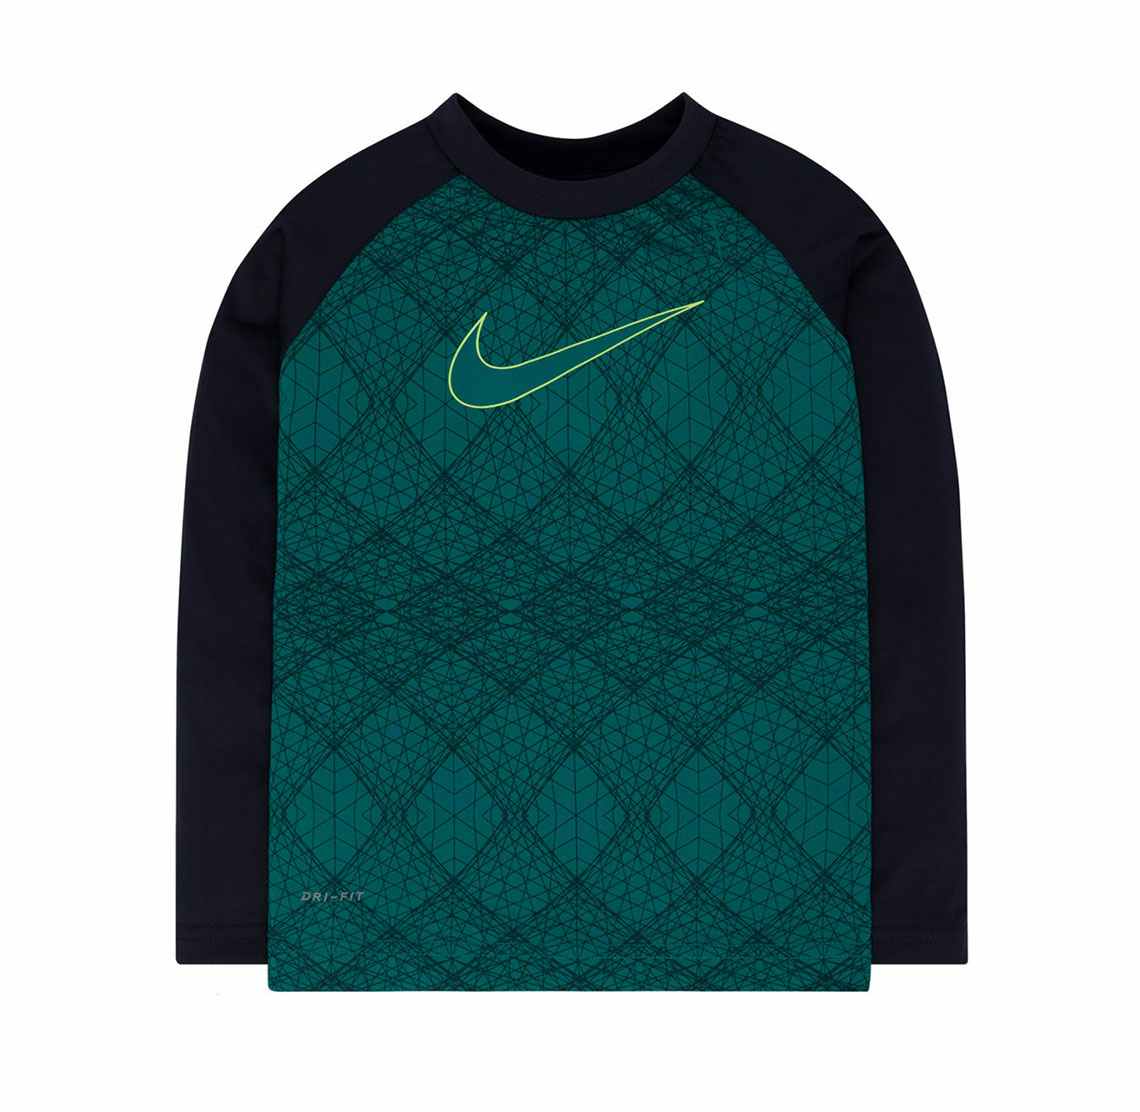 jcpenney-nike-clearance-kid-5